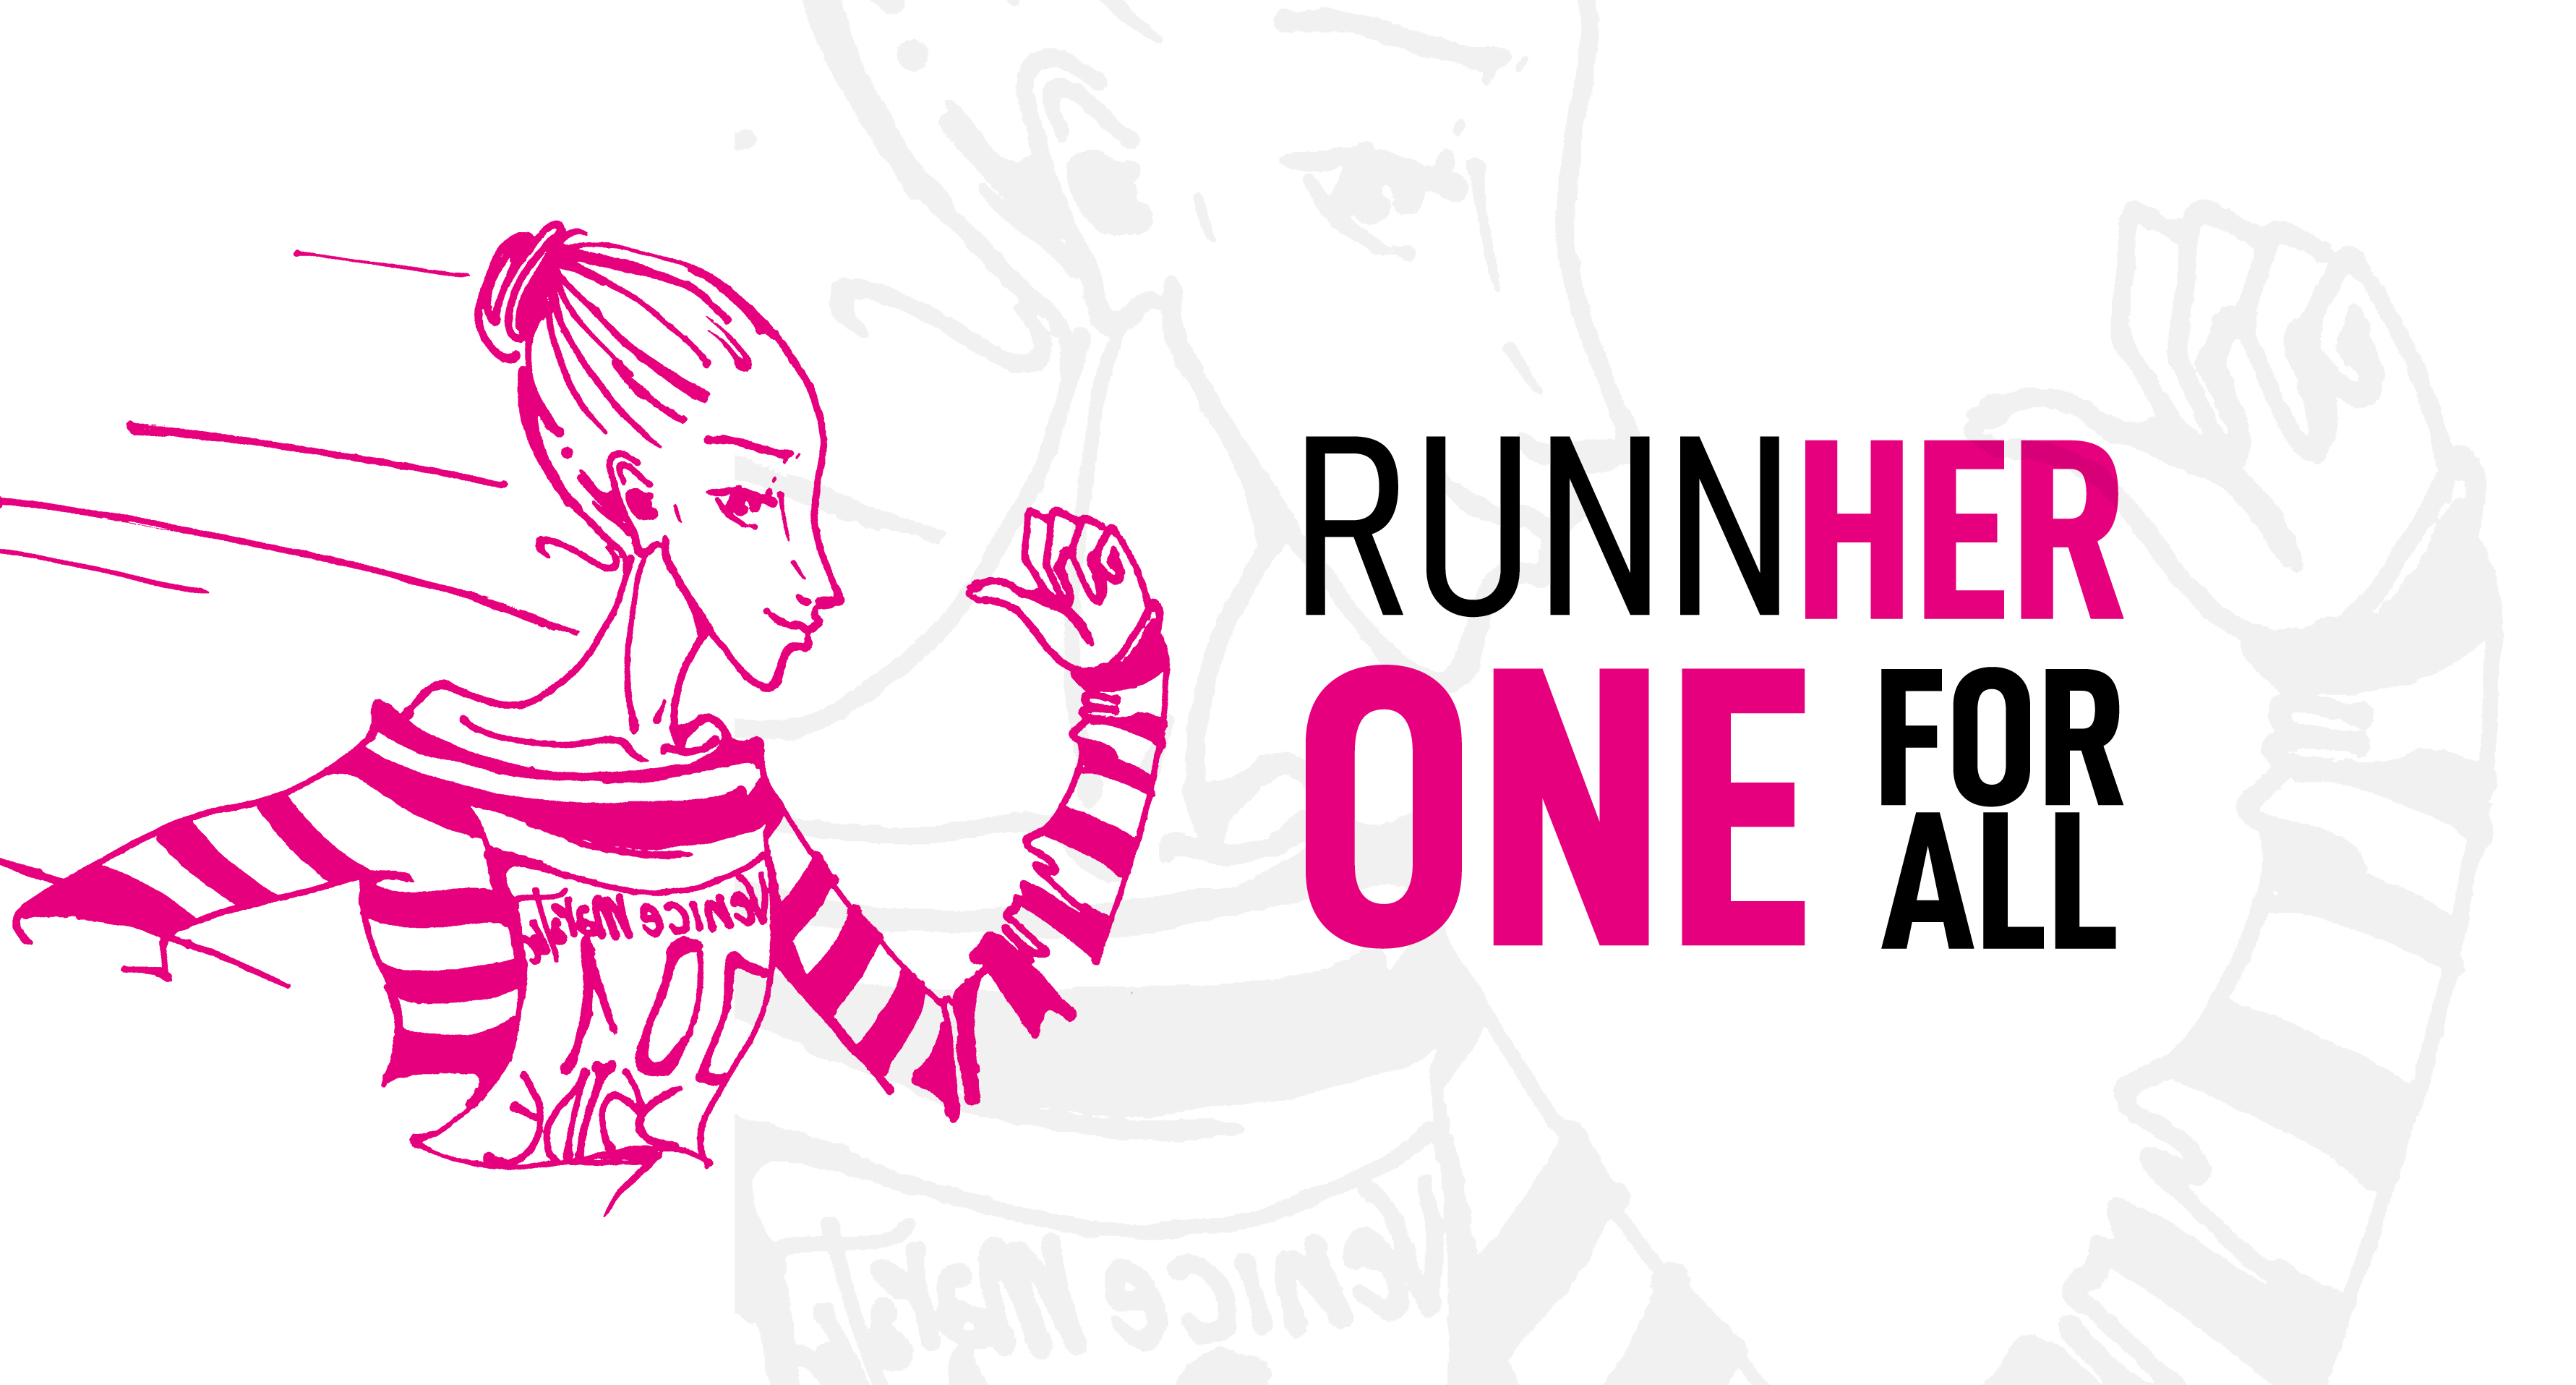 RUNNHER one for all-ISIDE ONLUS